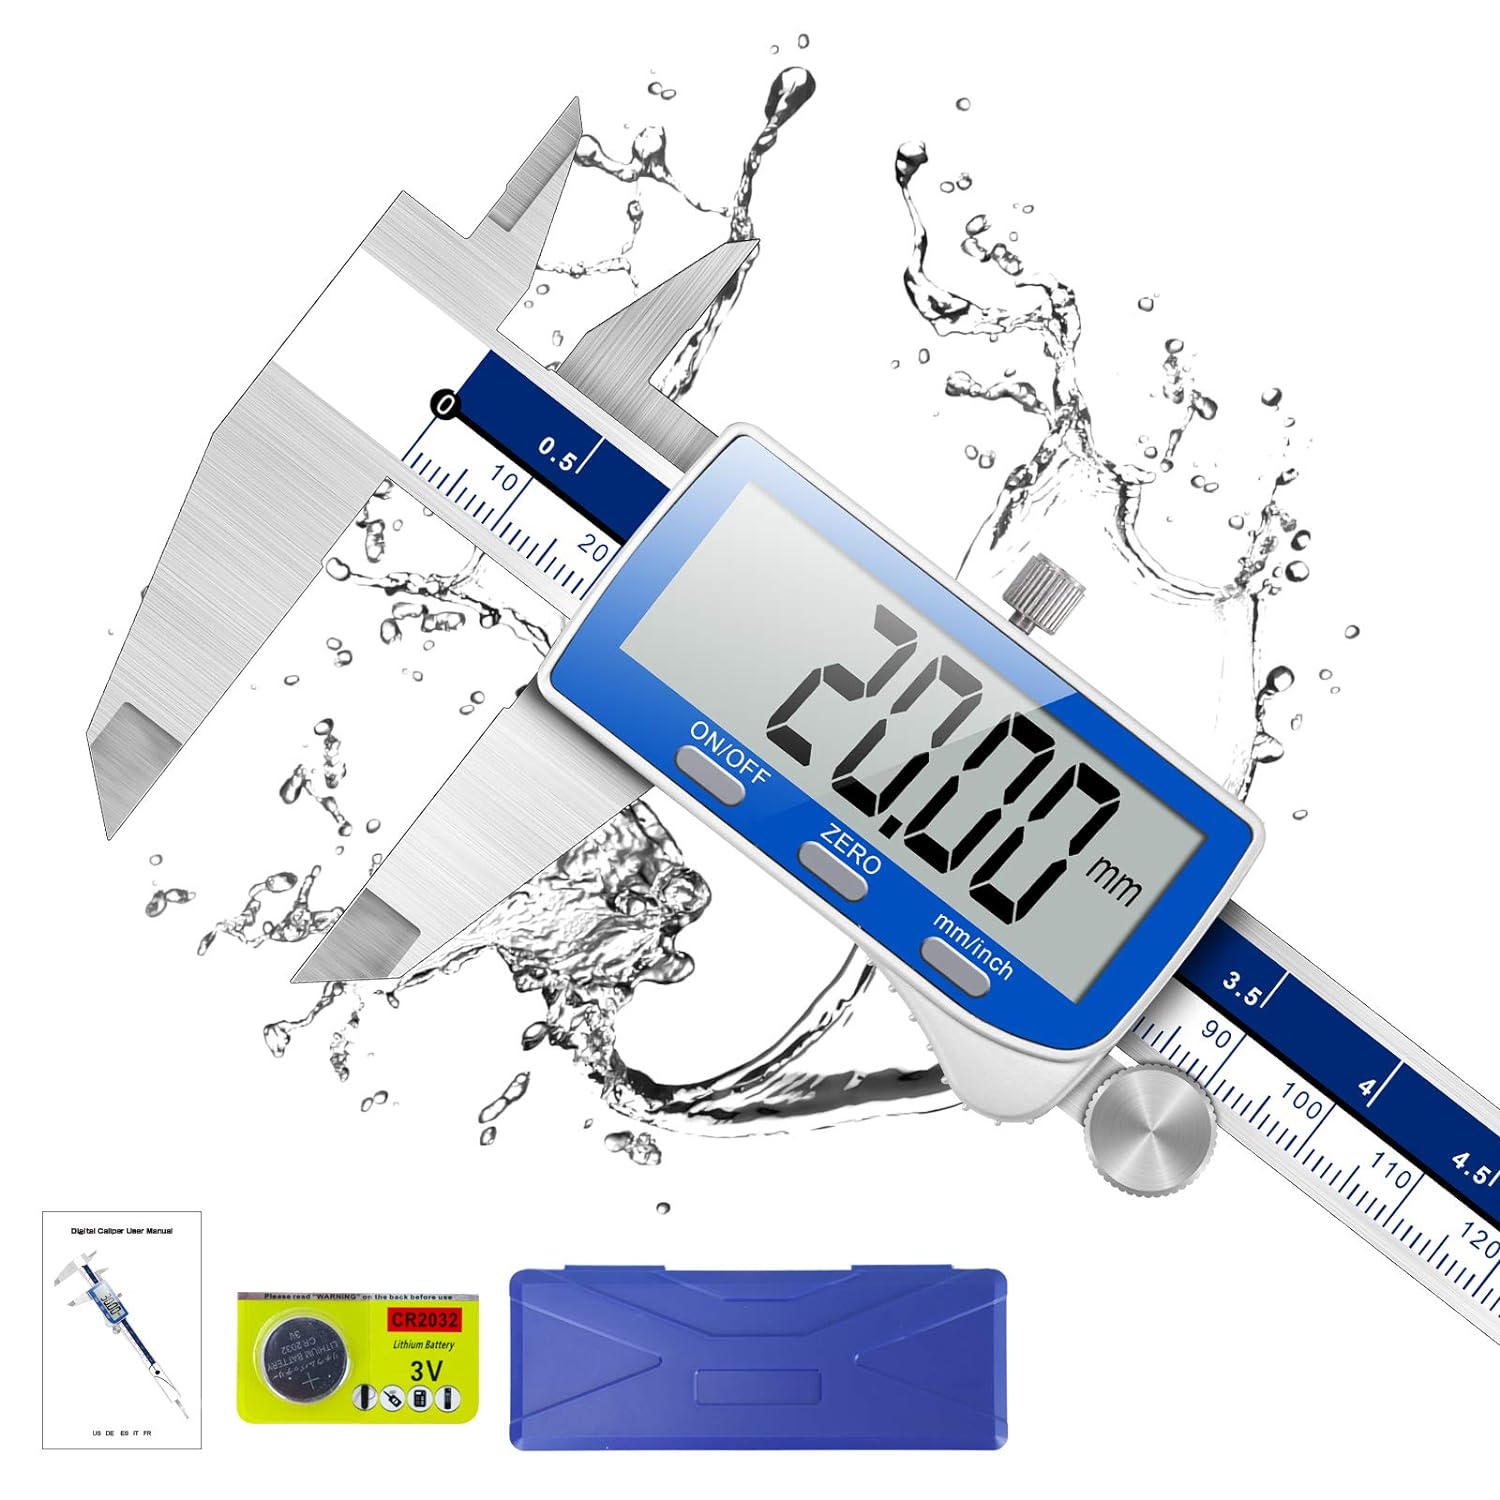 Qfun Digital Caliper, 0-6inch Caliper Measuring Tool Extreme Accuracy IP54 Waterproof Electronic Vernier Caliper Stainless Steel Digital Micrometer with Extra Large LCD Screen